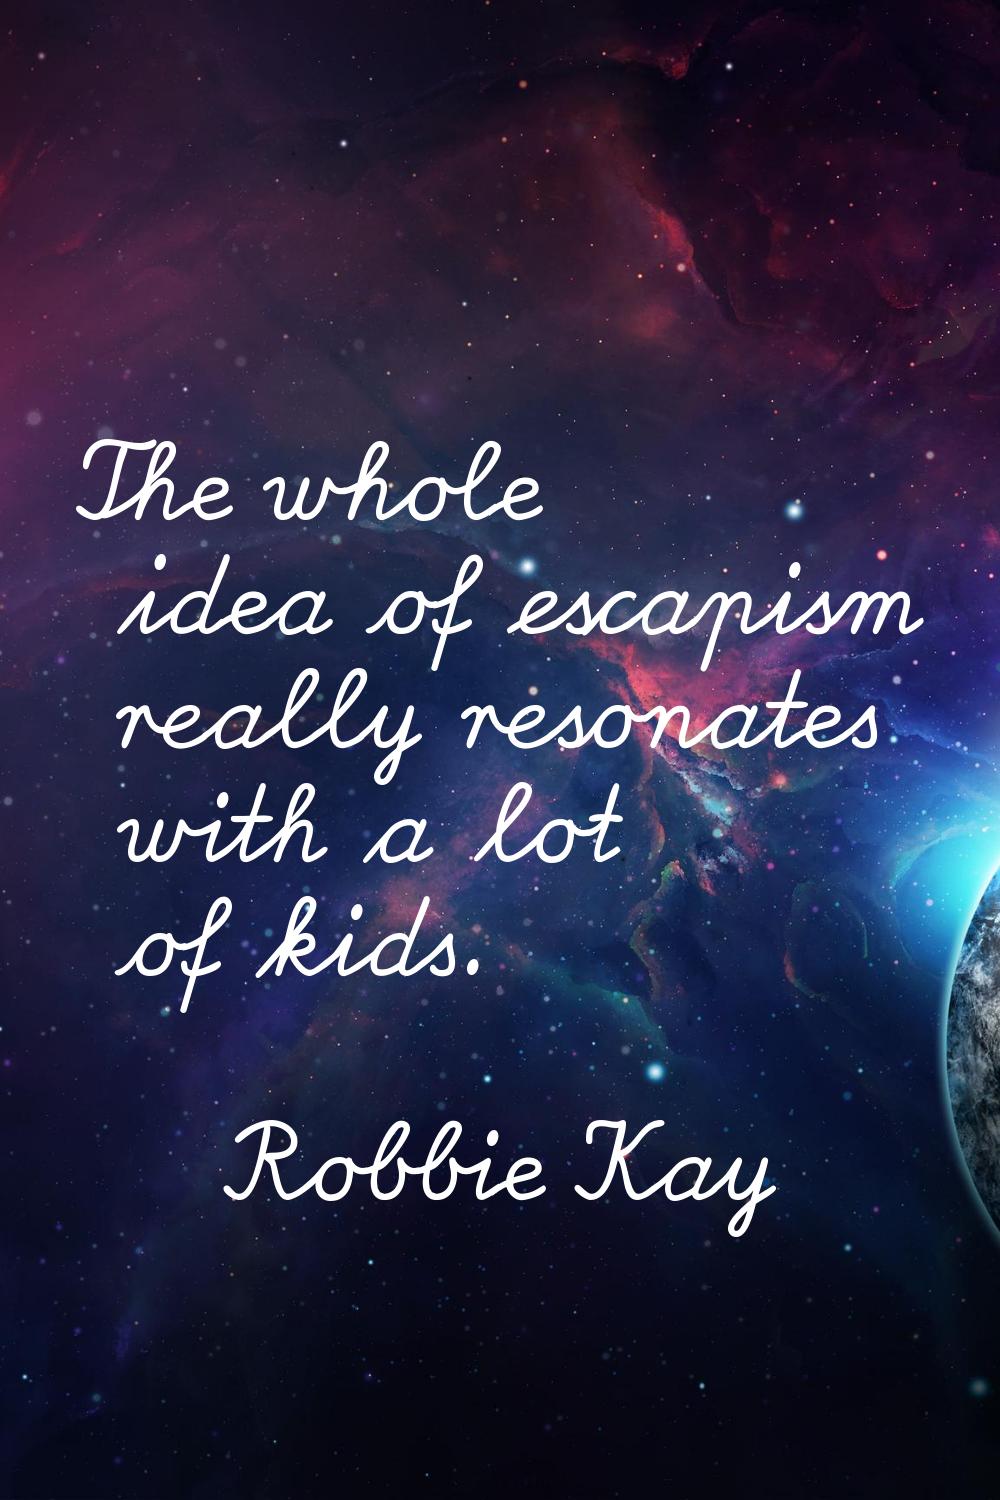 The whole idea of escapism really resonates with a lot of kids.